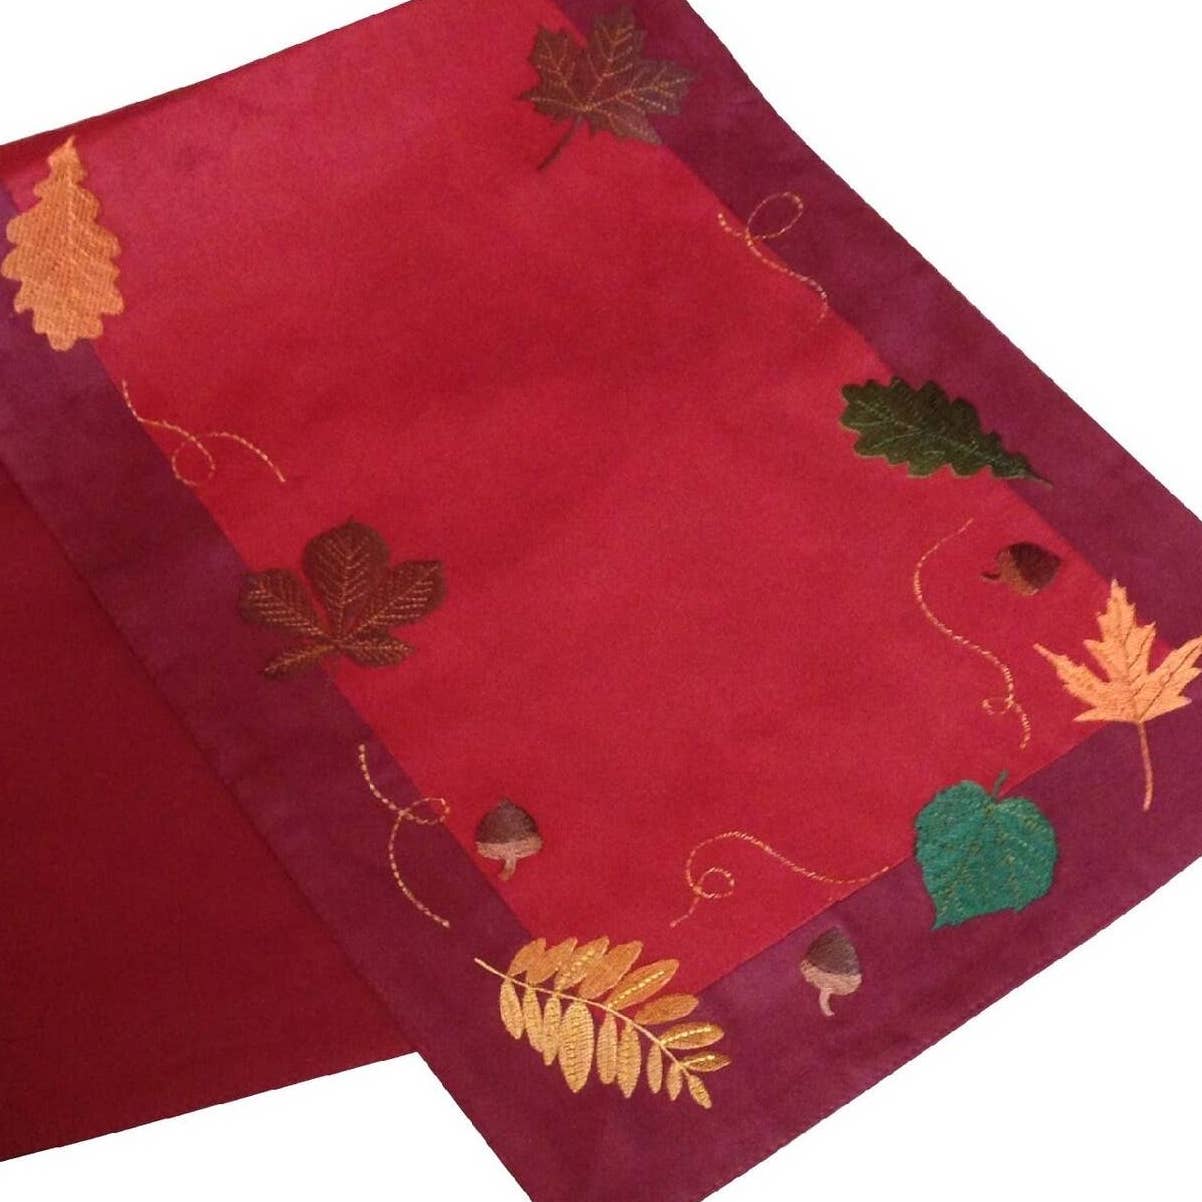 Set of 2 Kohl's Autumn Harvest Table Runner Microsuede Embroidered Leaves NEW